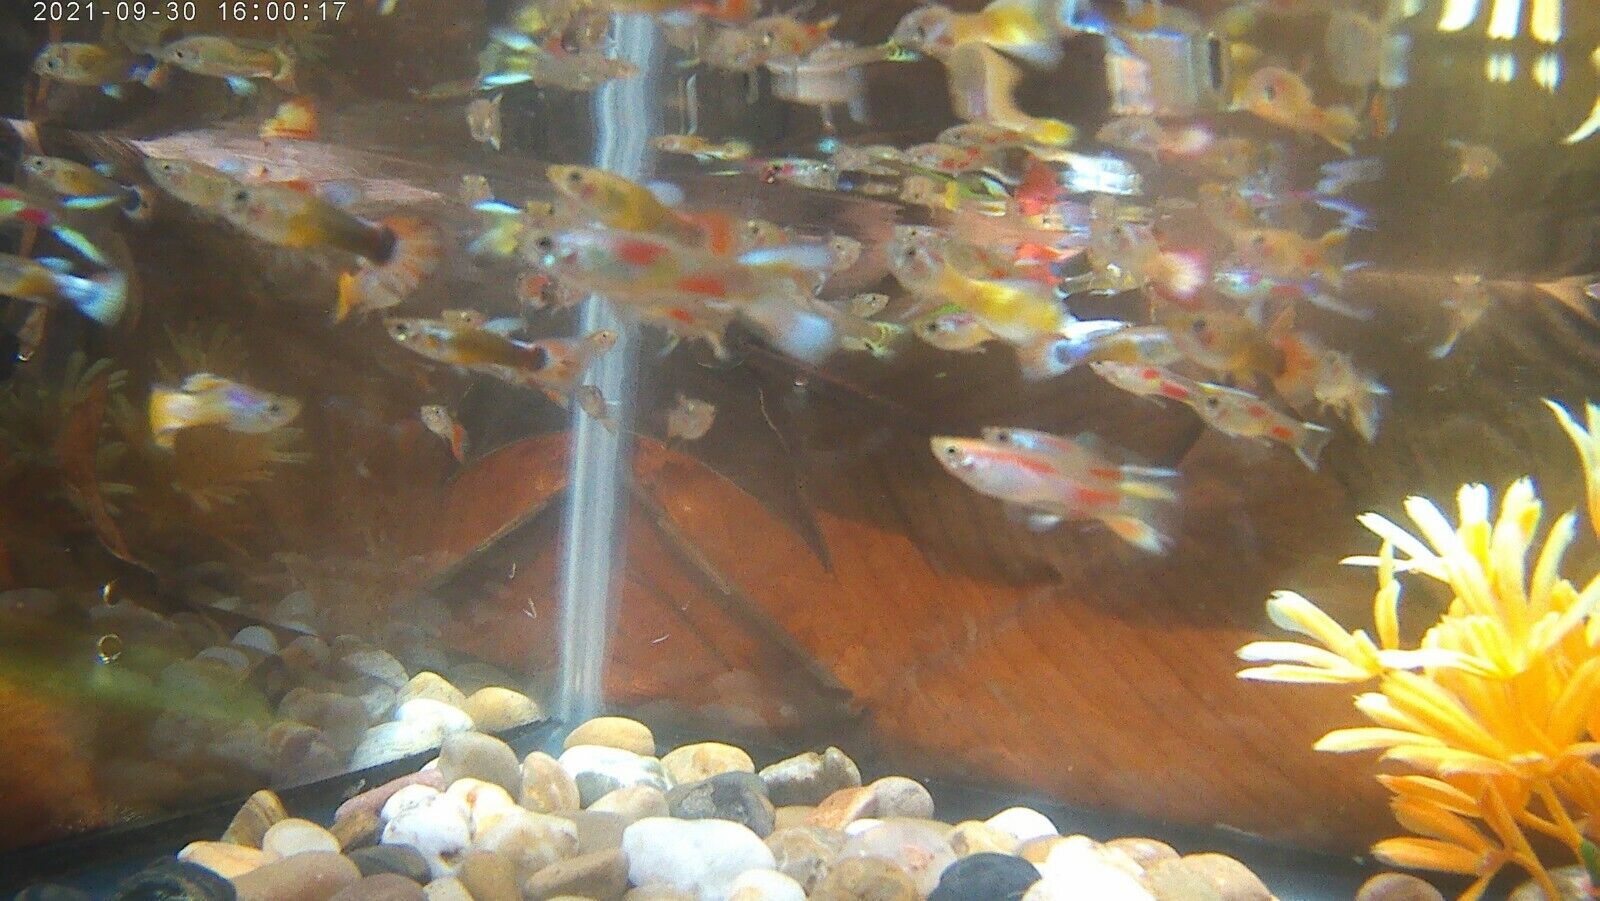 MAGNIFICENT SEVEN  (24.95) GUPPY SALE (FREE SHIPPING) Get 7 Colorful Male Guppy Без бренда